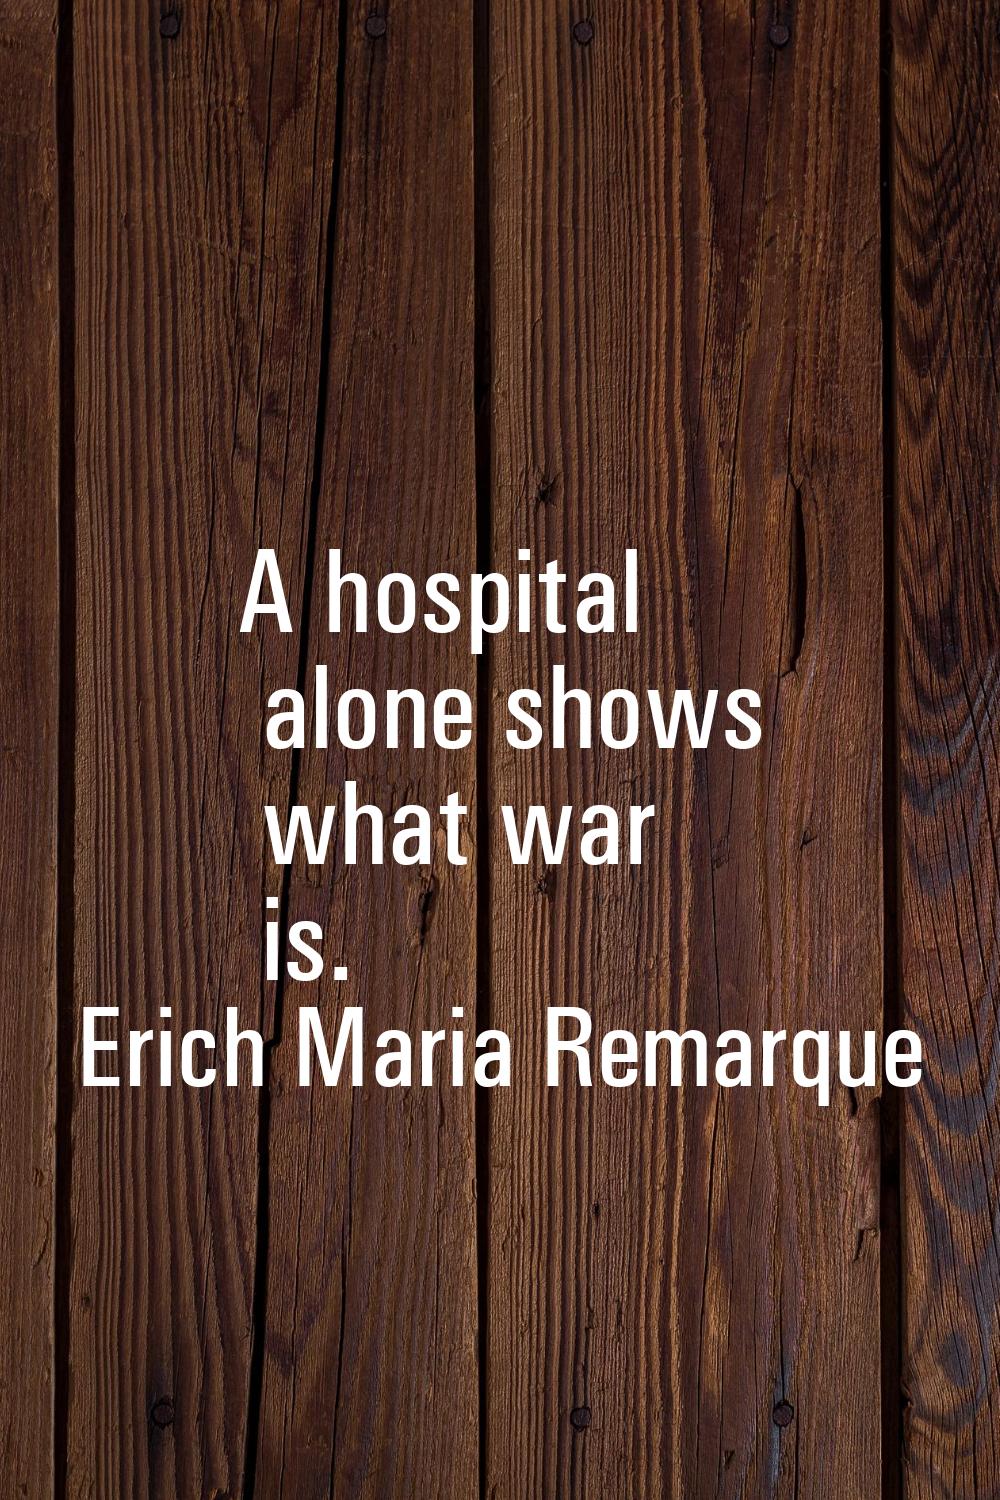 A hospital alone shows what war is.